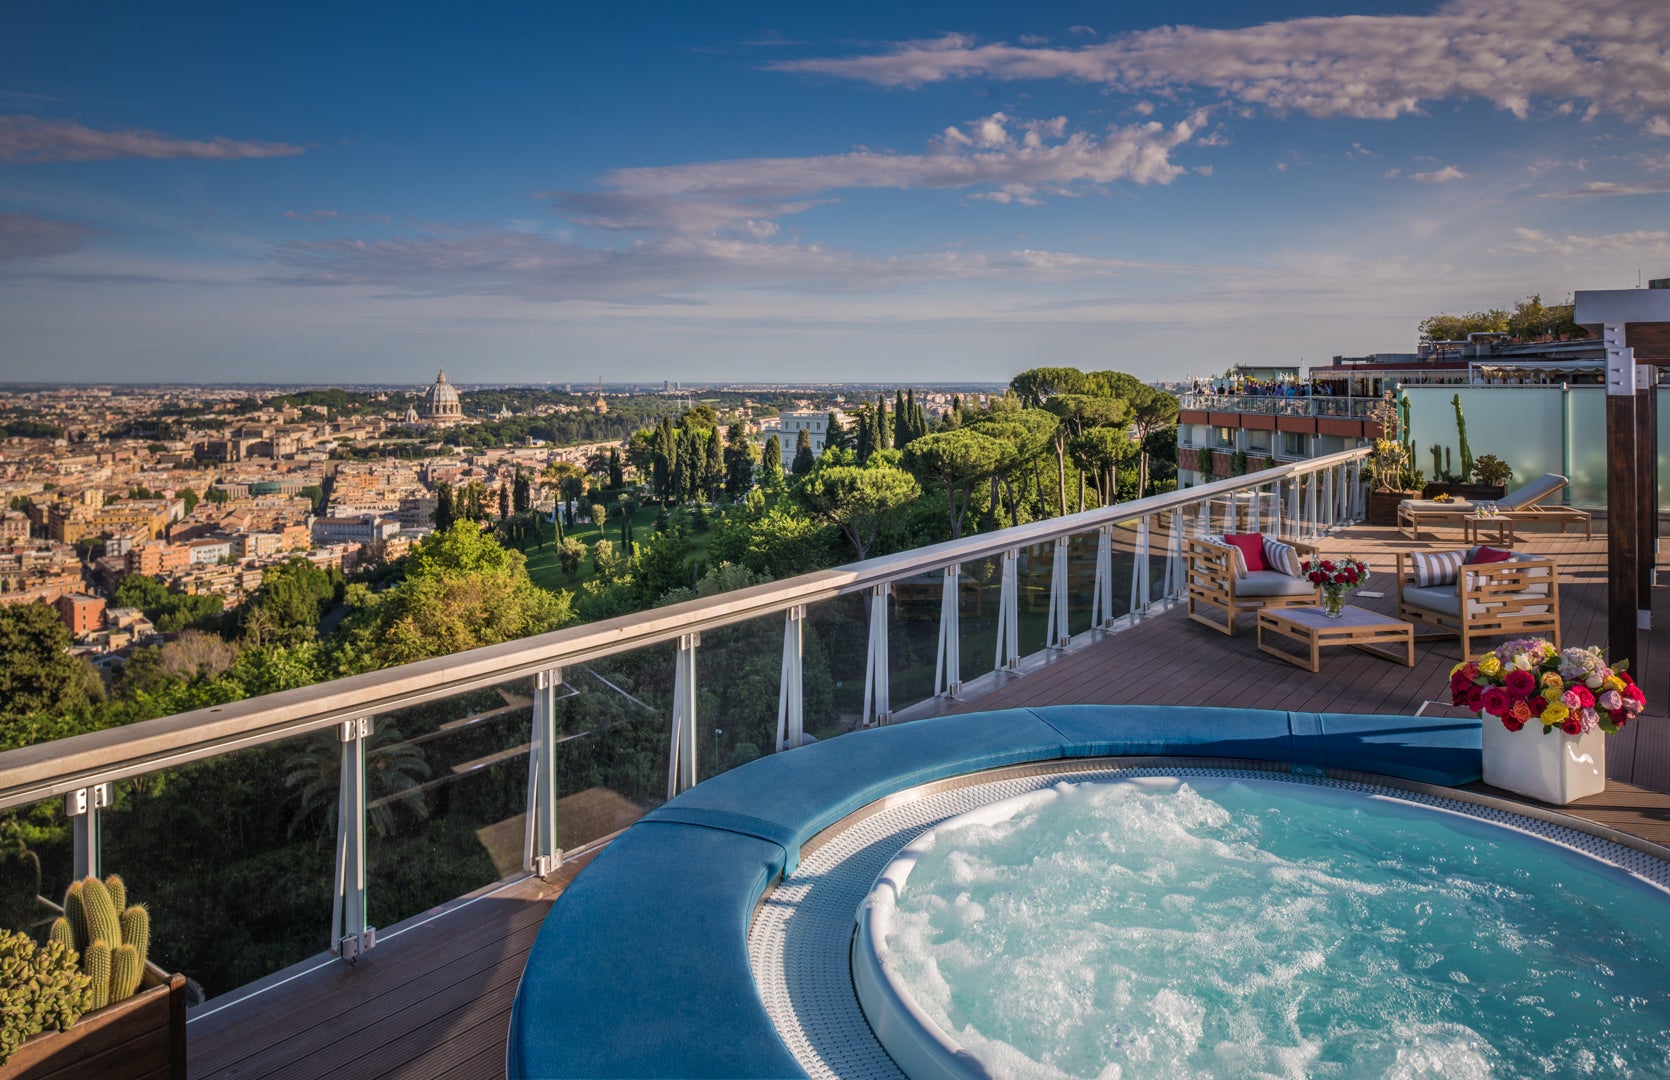 Rome Cavalieri’s Penthouse Suite comes with a private hot tub